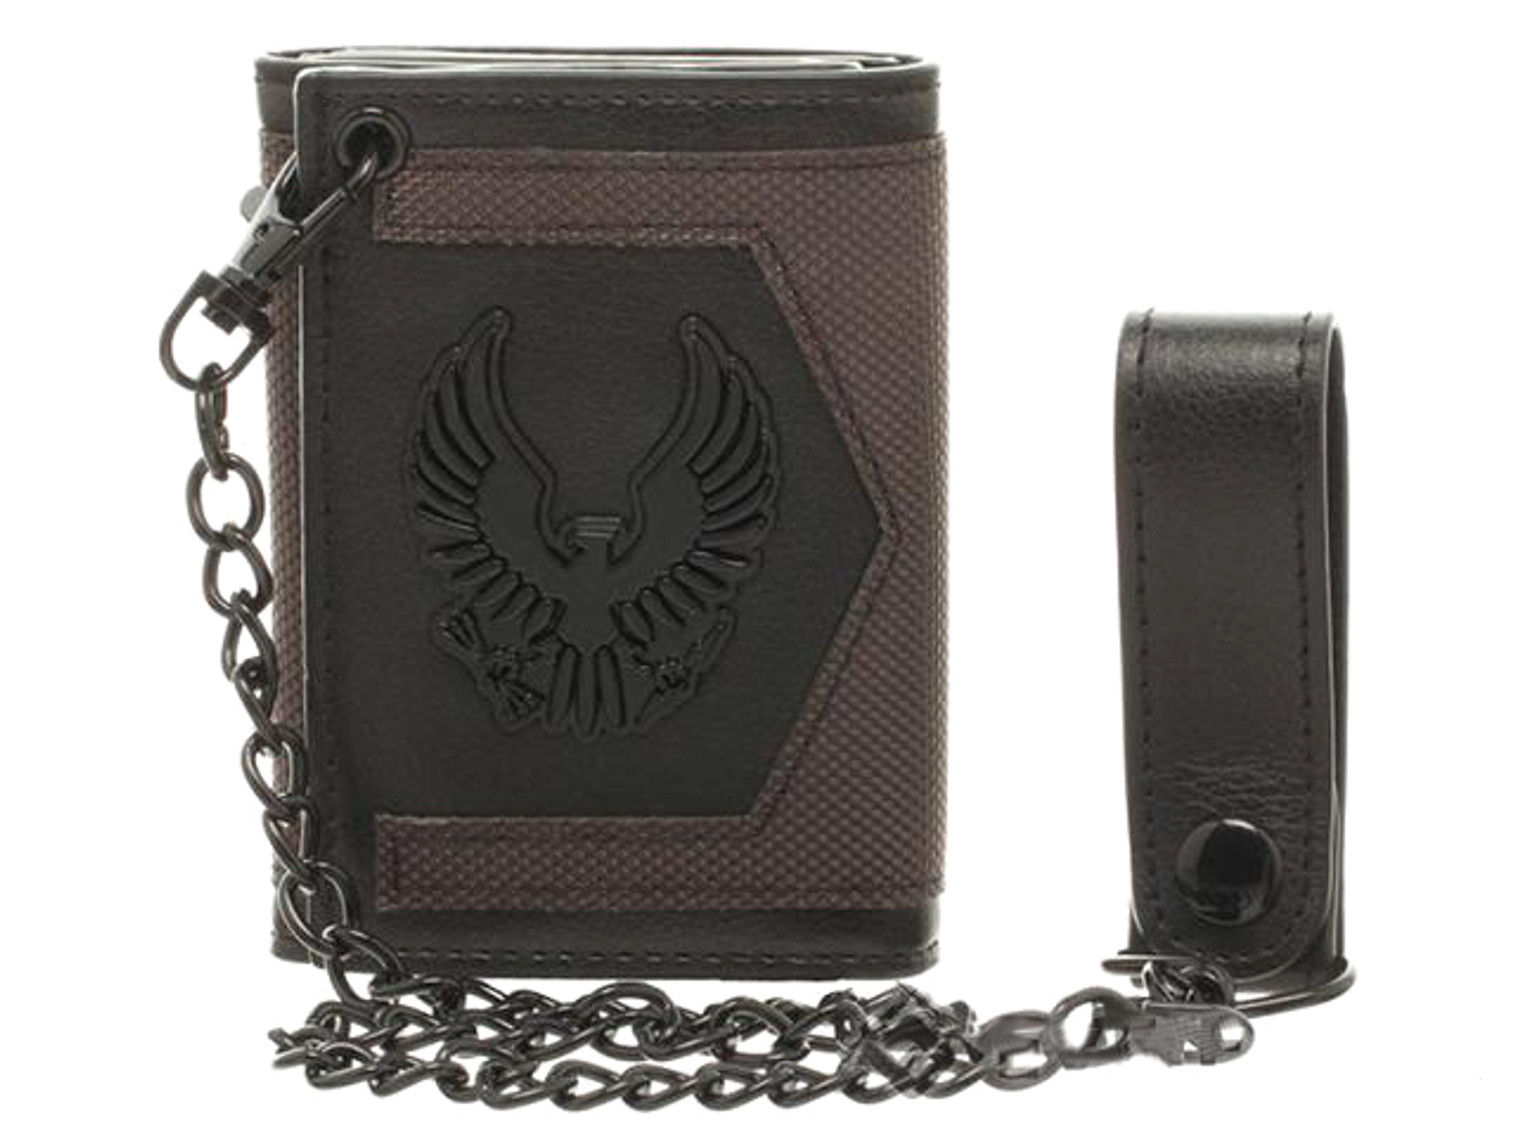 HALO 5 UNSC Trifold Chain Wallet - OD Green / Black